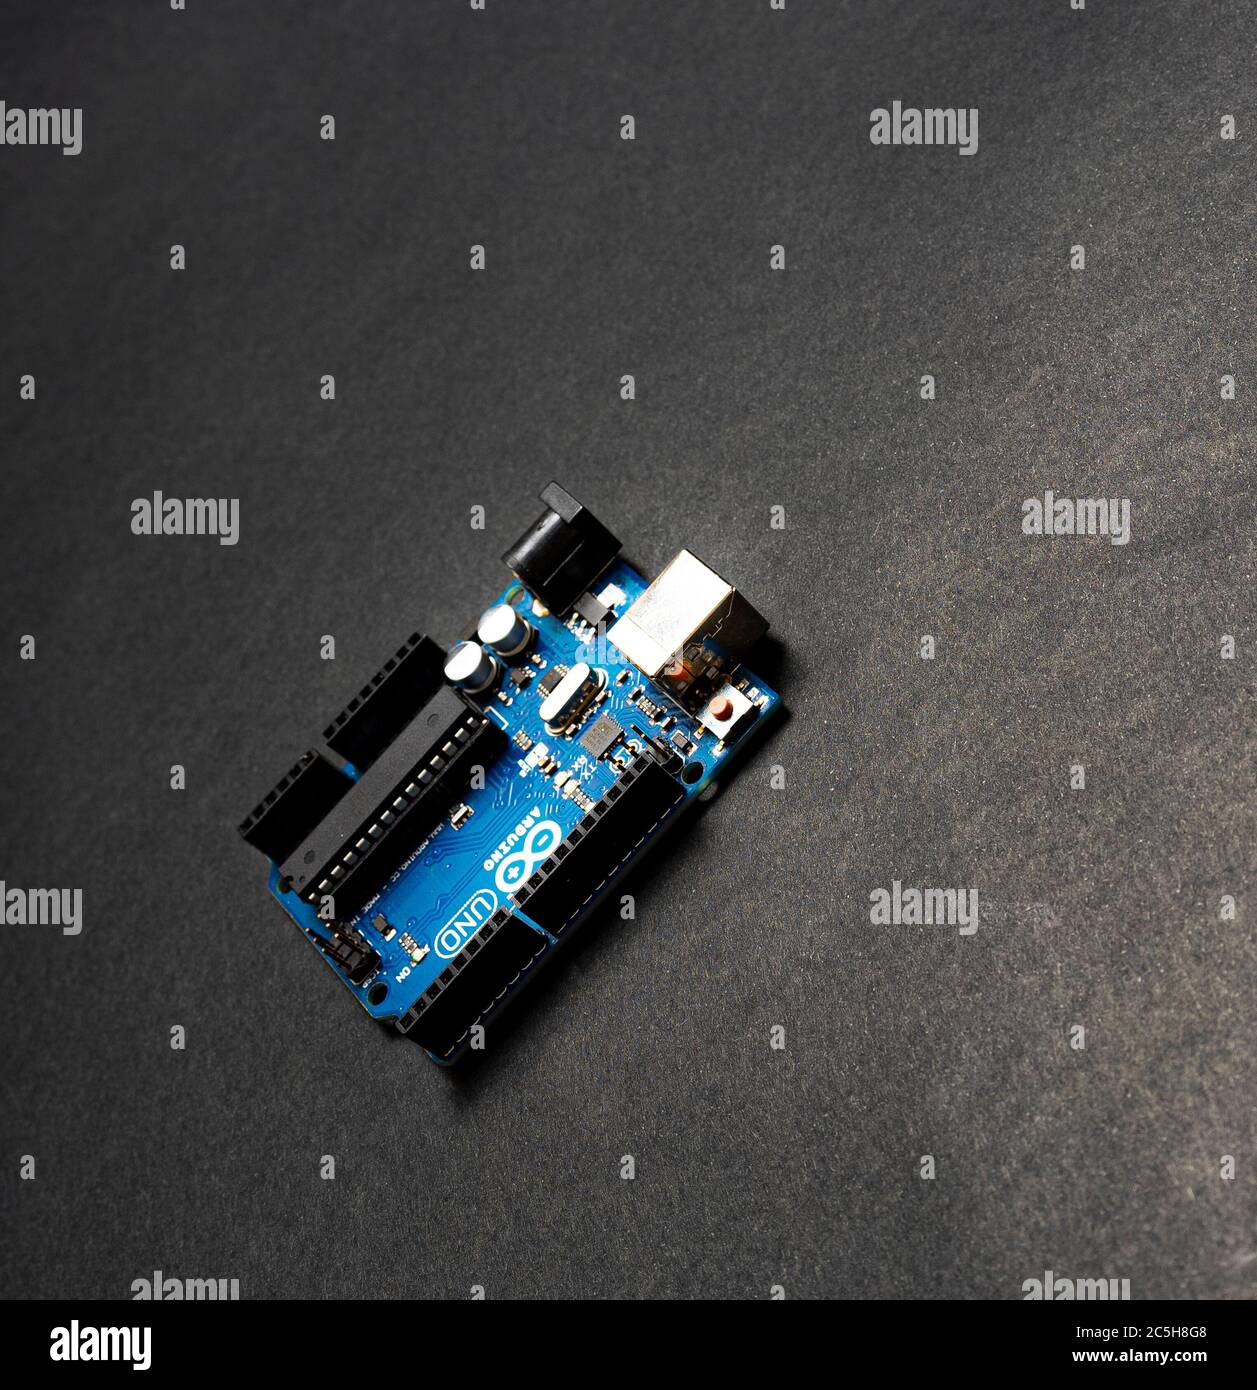 Sankt-Petersburg, Russia - February 28, 2020: Arduino UNO board on black background, close up. Microcontroller for programming. Stock Photo